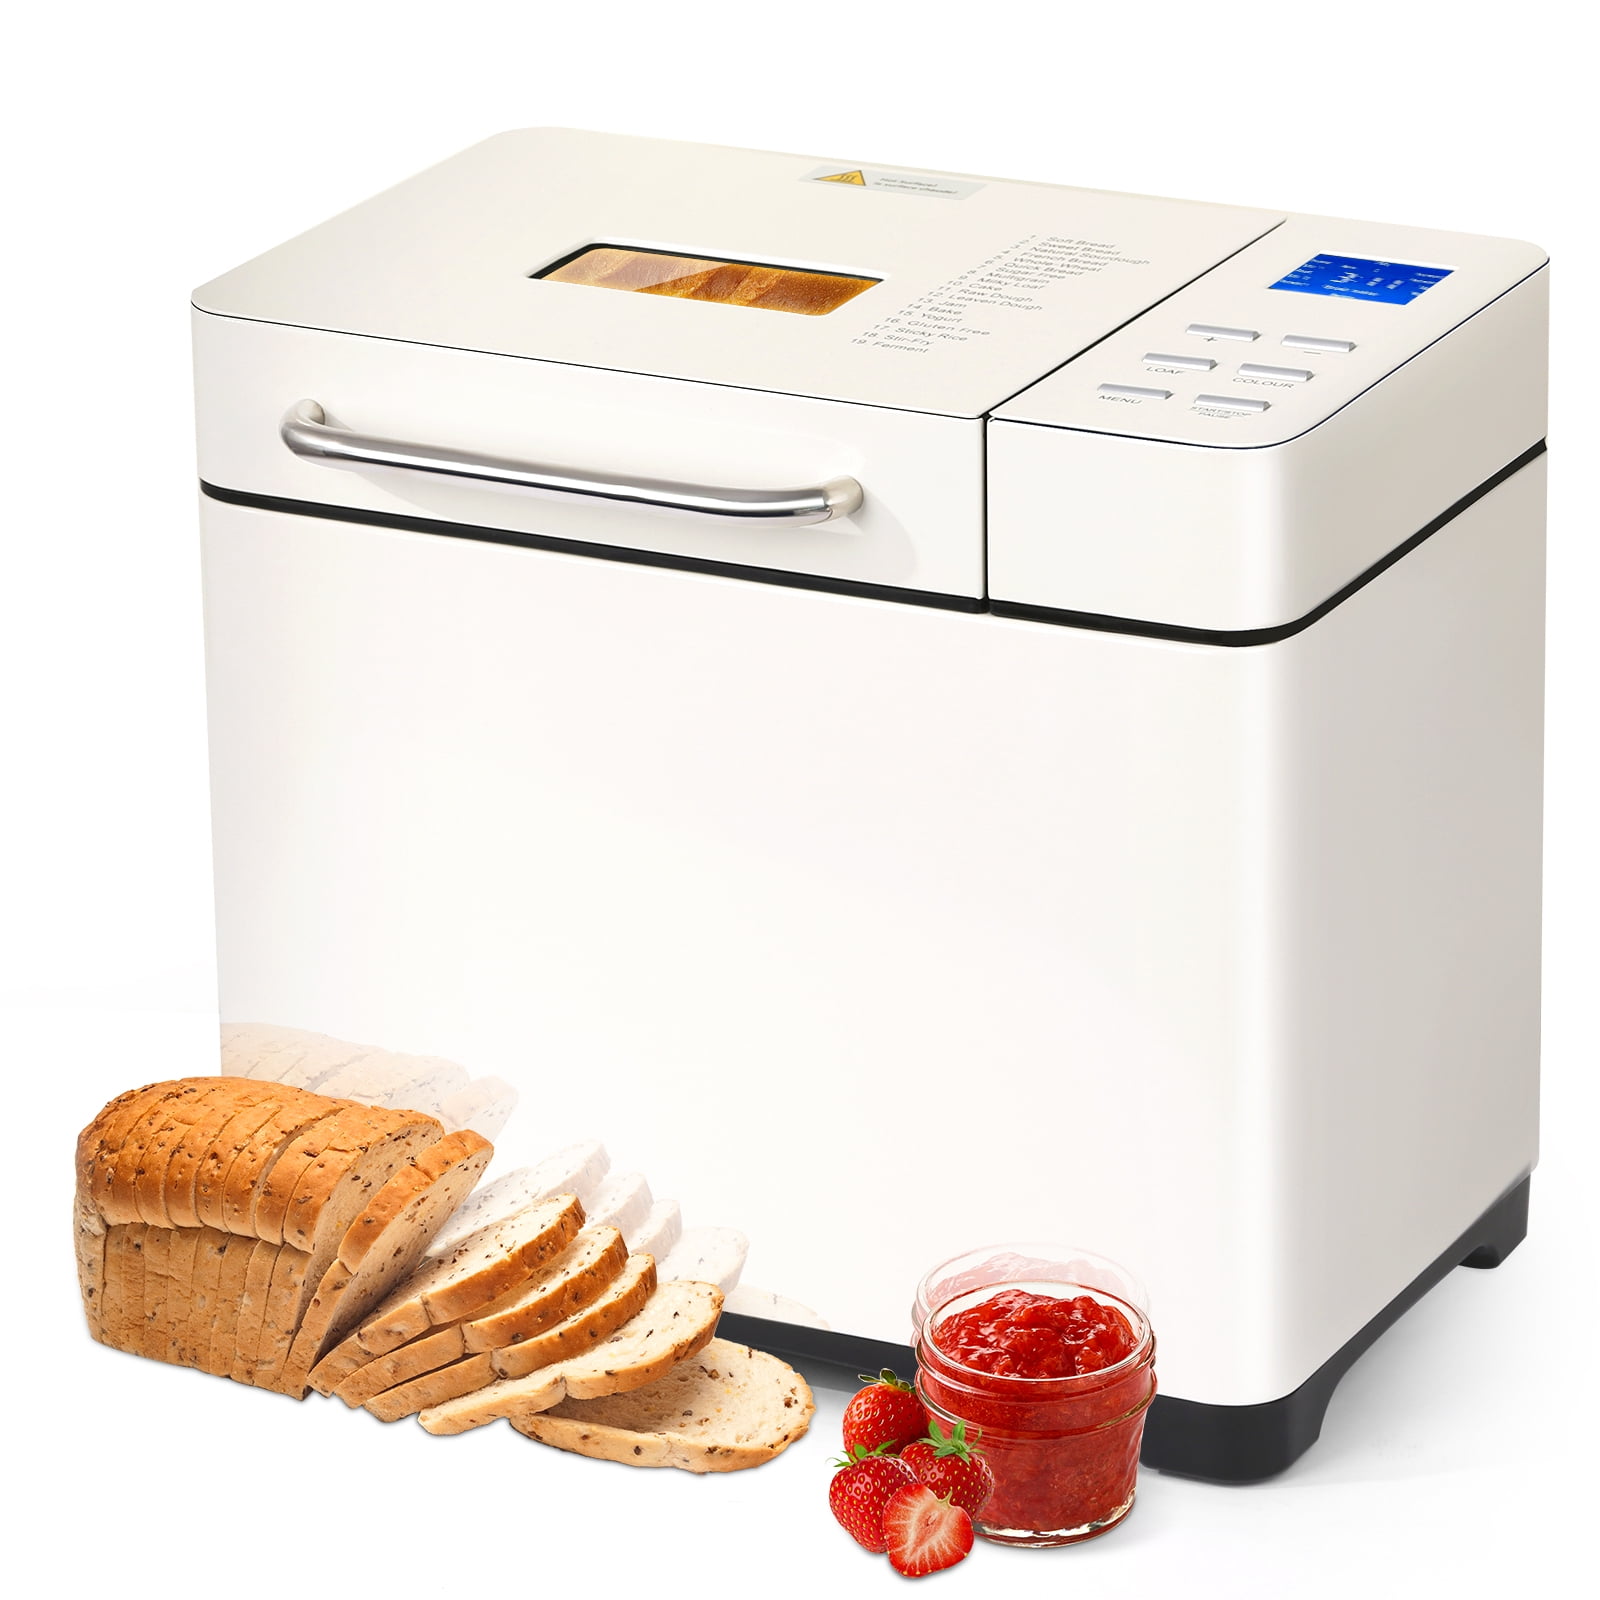 KBS 17-in-1 Bread Machine Review & How To Use